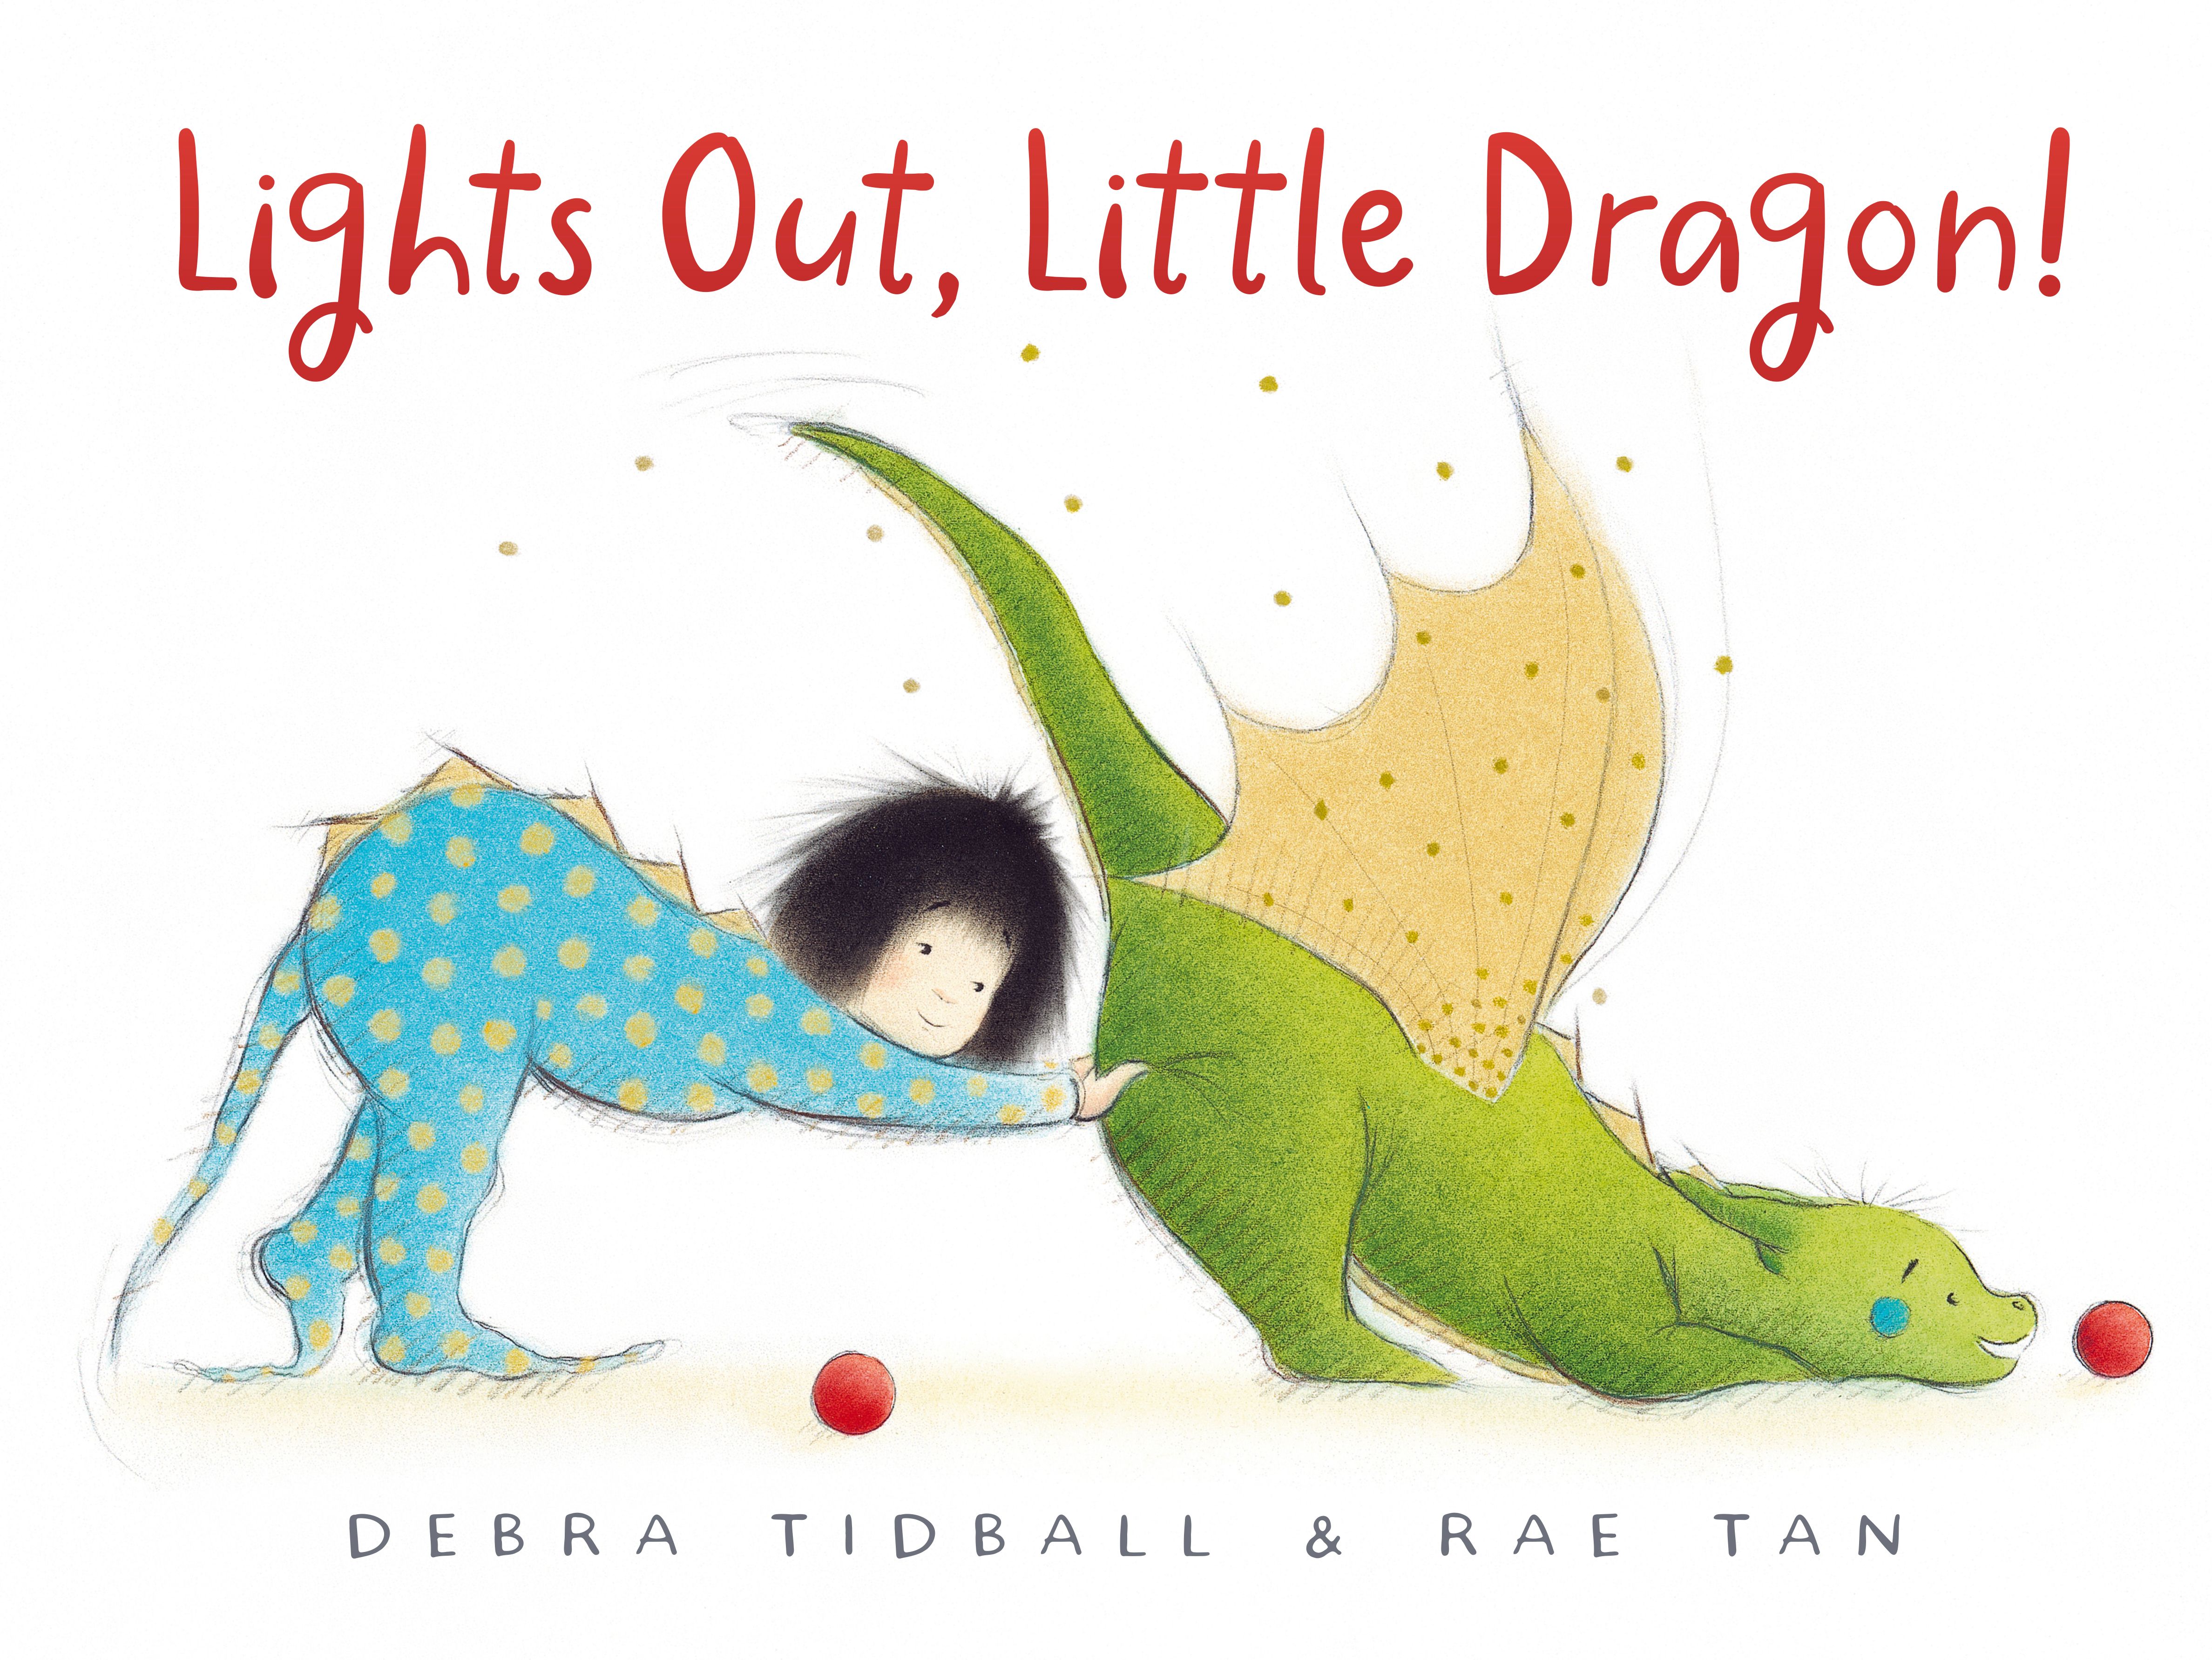 Lights Out, Little Dragon by Debra Tidball and Rae Tan